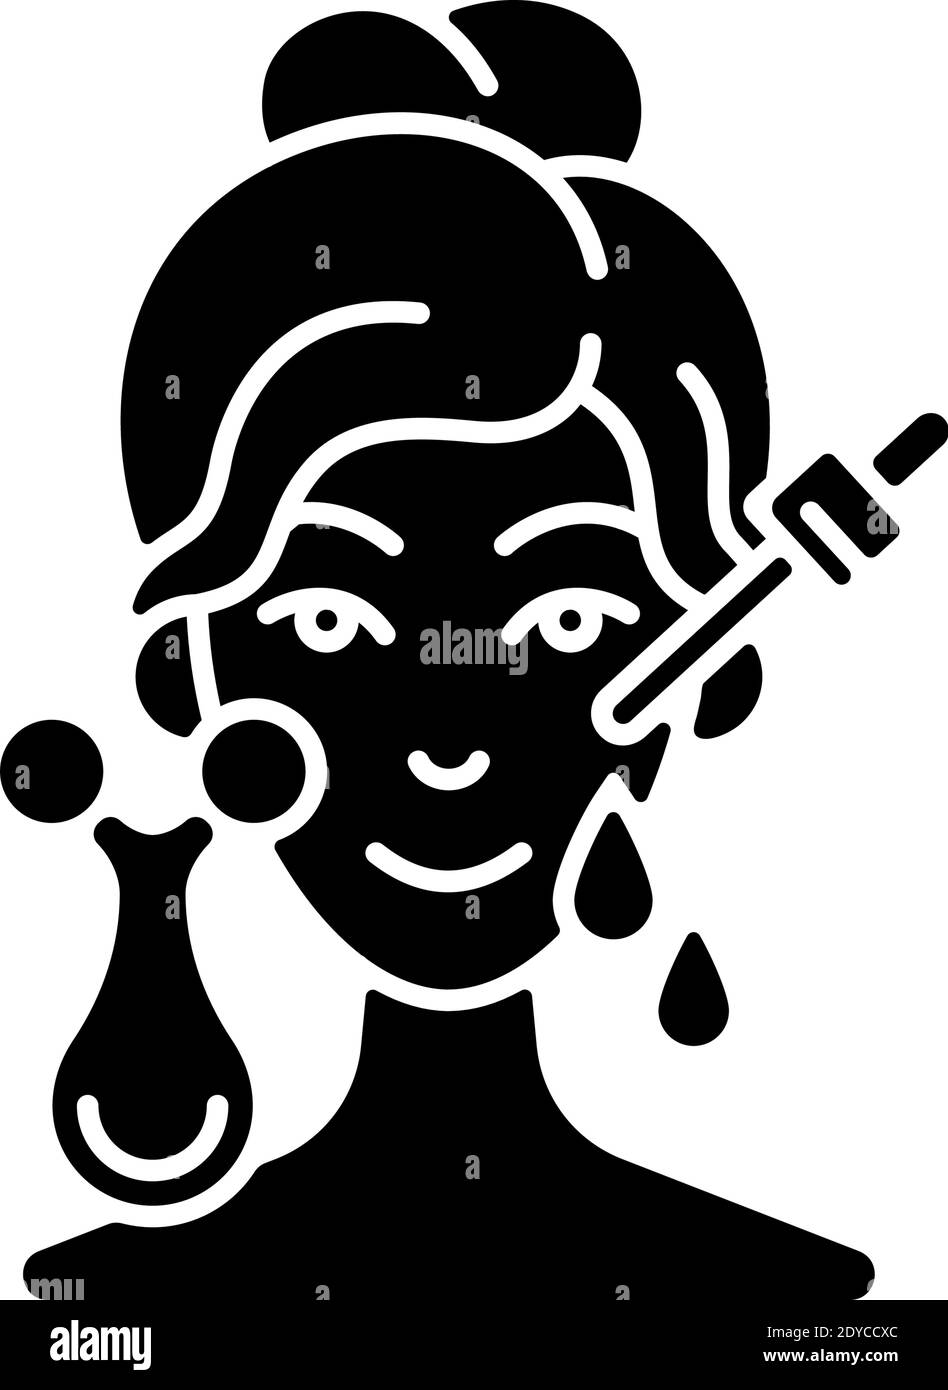 Micro current massager black glyph icon Stock Vector